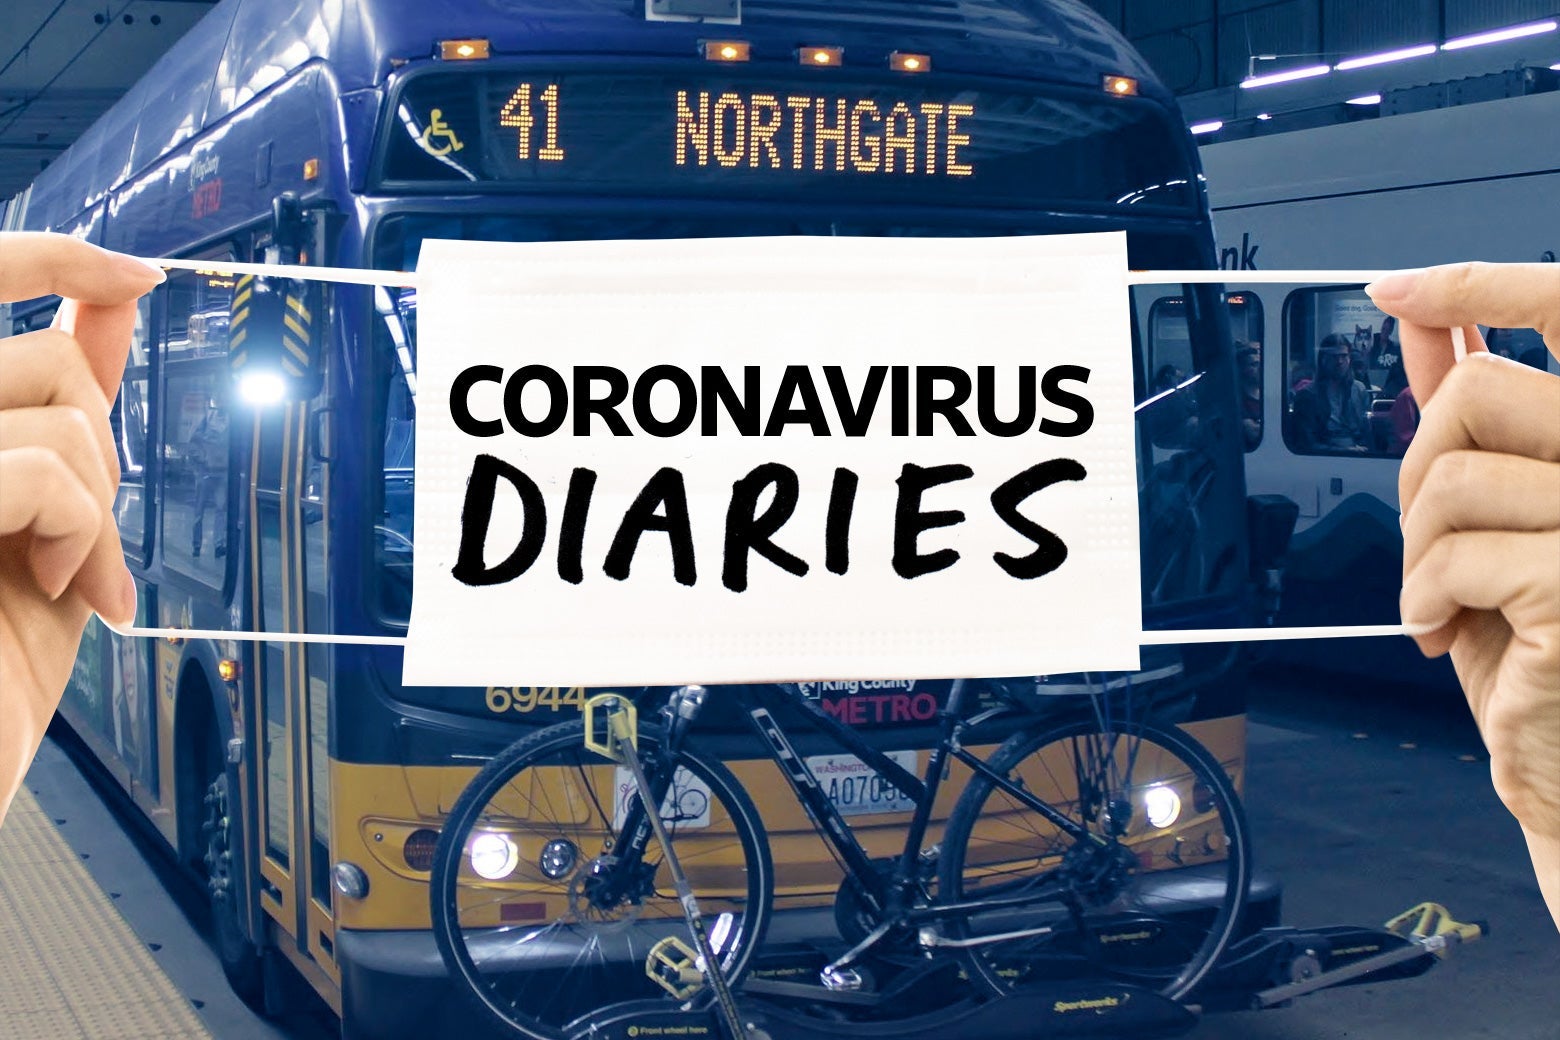 Two hands holding a surgical mask that says "Coronavirus Diaries" over a Seattle bus.